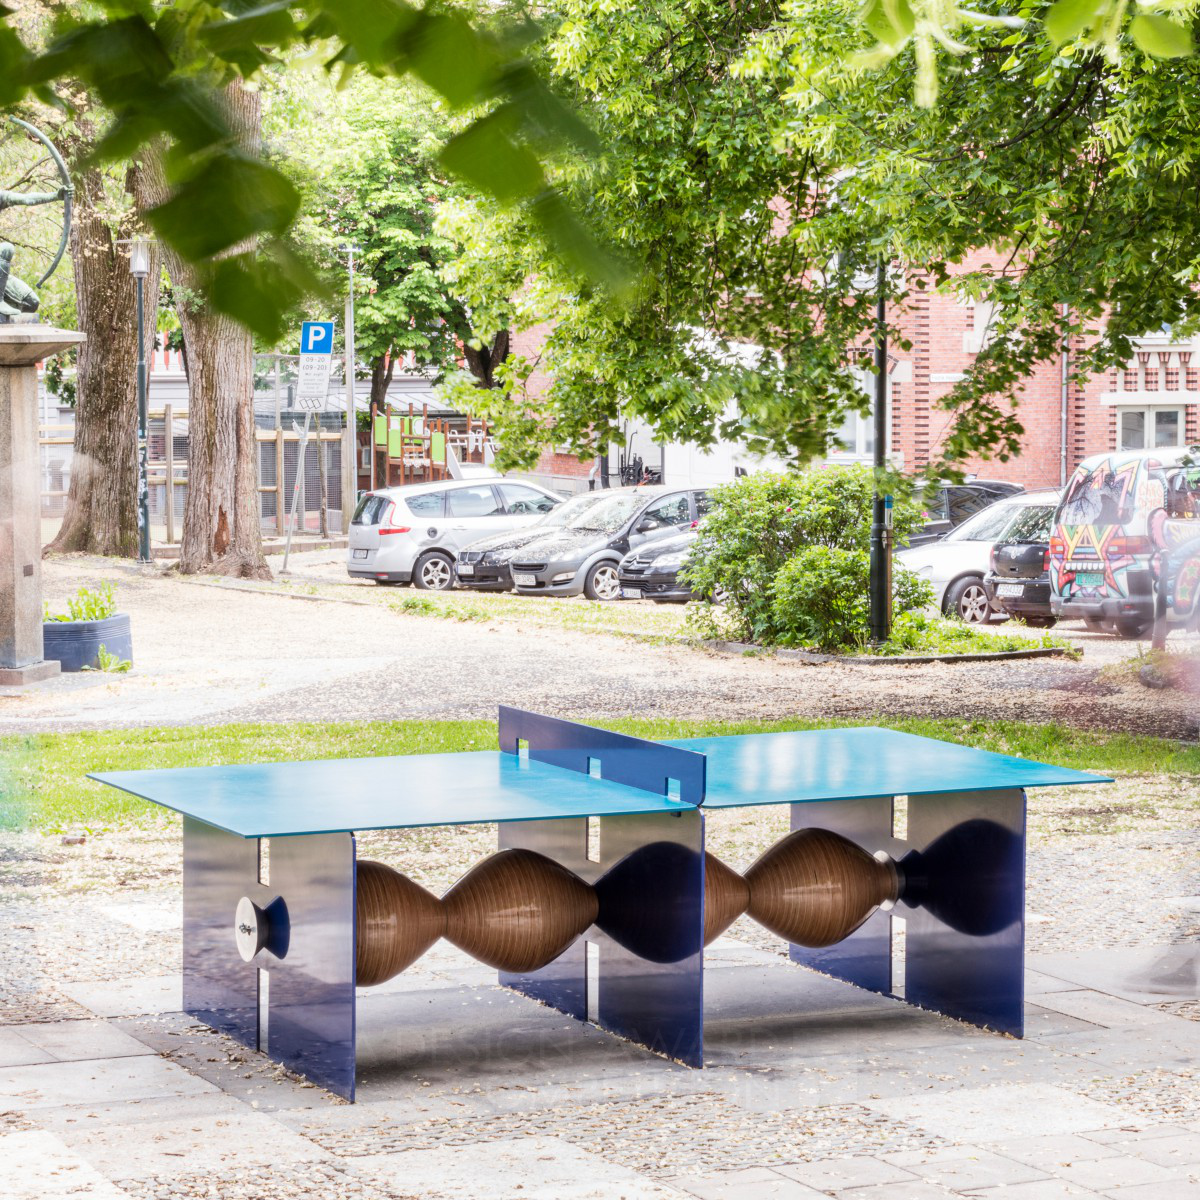 Sandane Ping Pong Table by Torgeir Stige